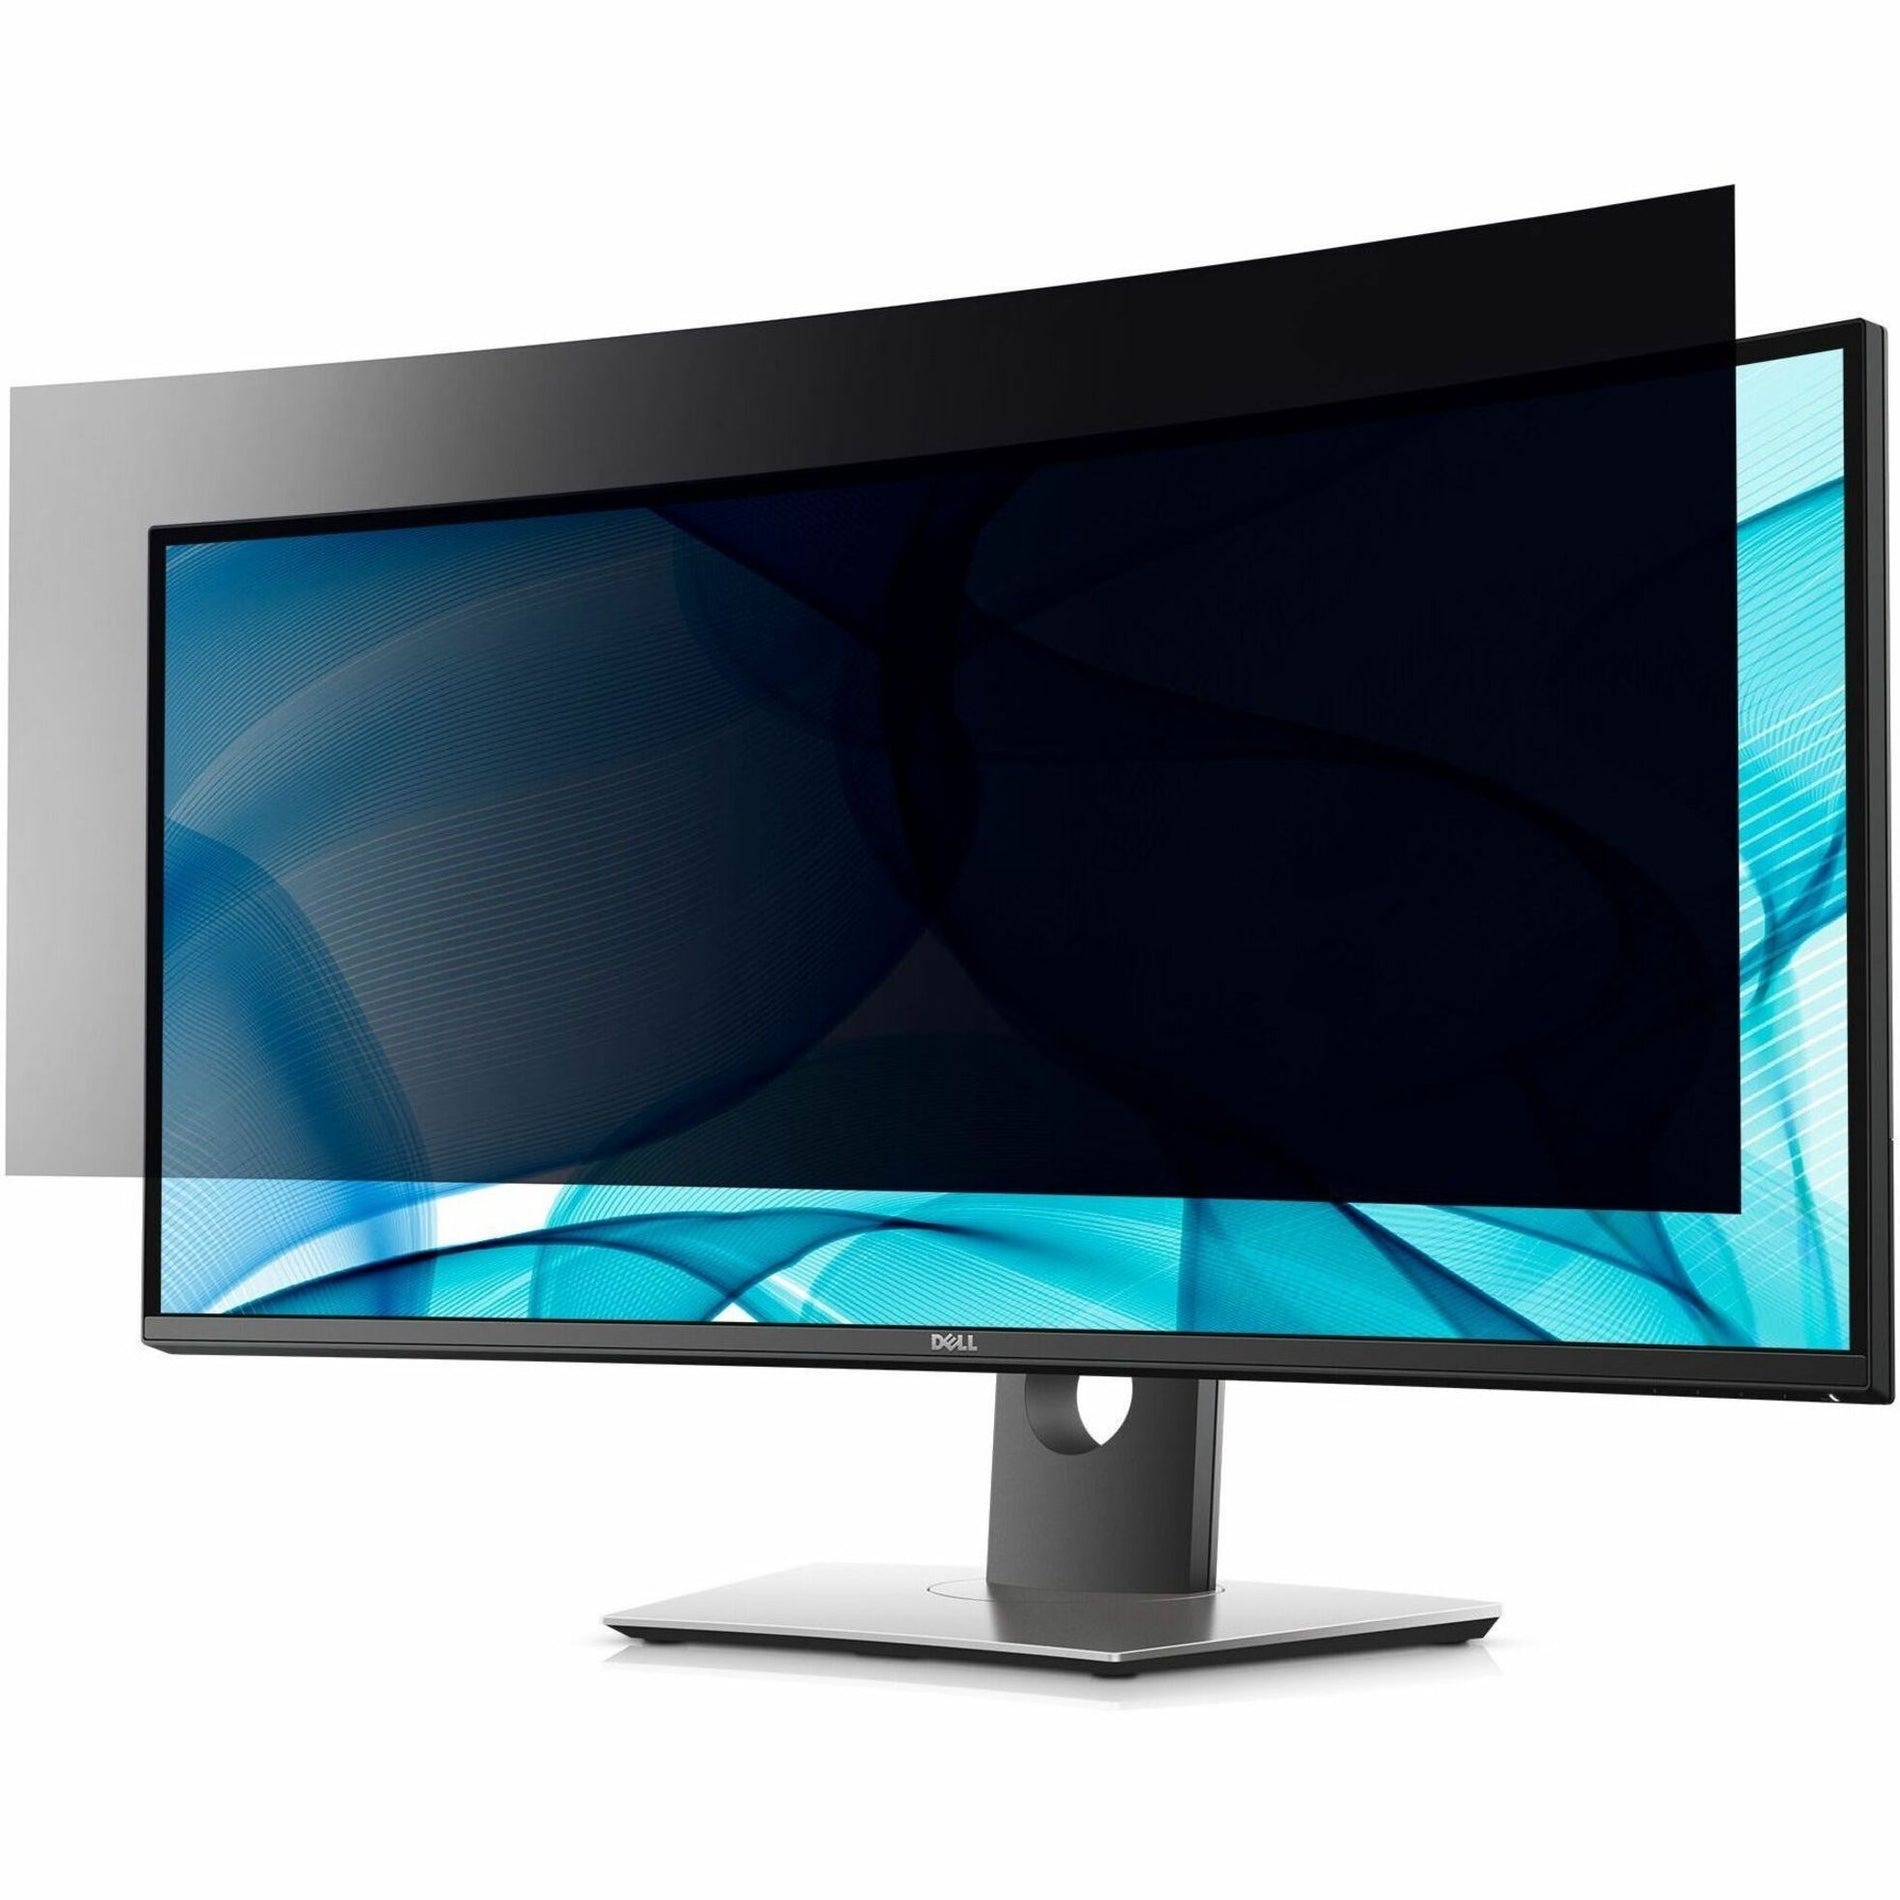 Targus AST082GLZ 4Vu Privacy Screen for Dell U3417W, Easy to Apply, 21:9 Aspect Ratio